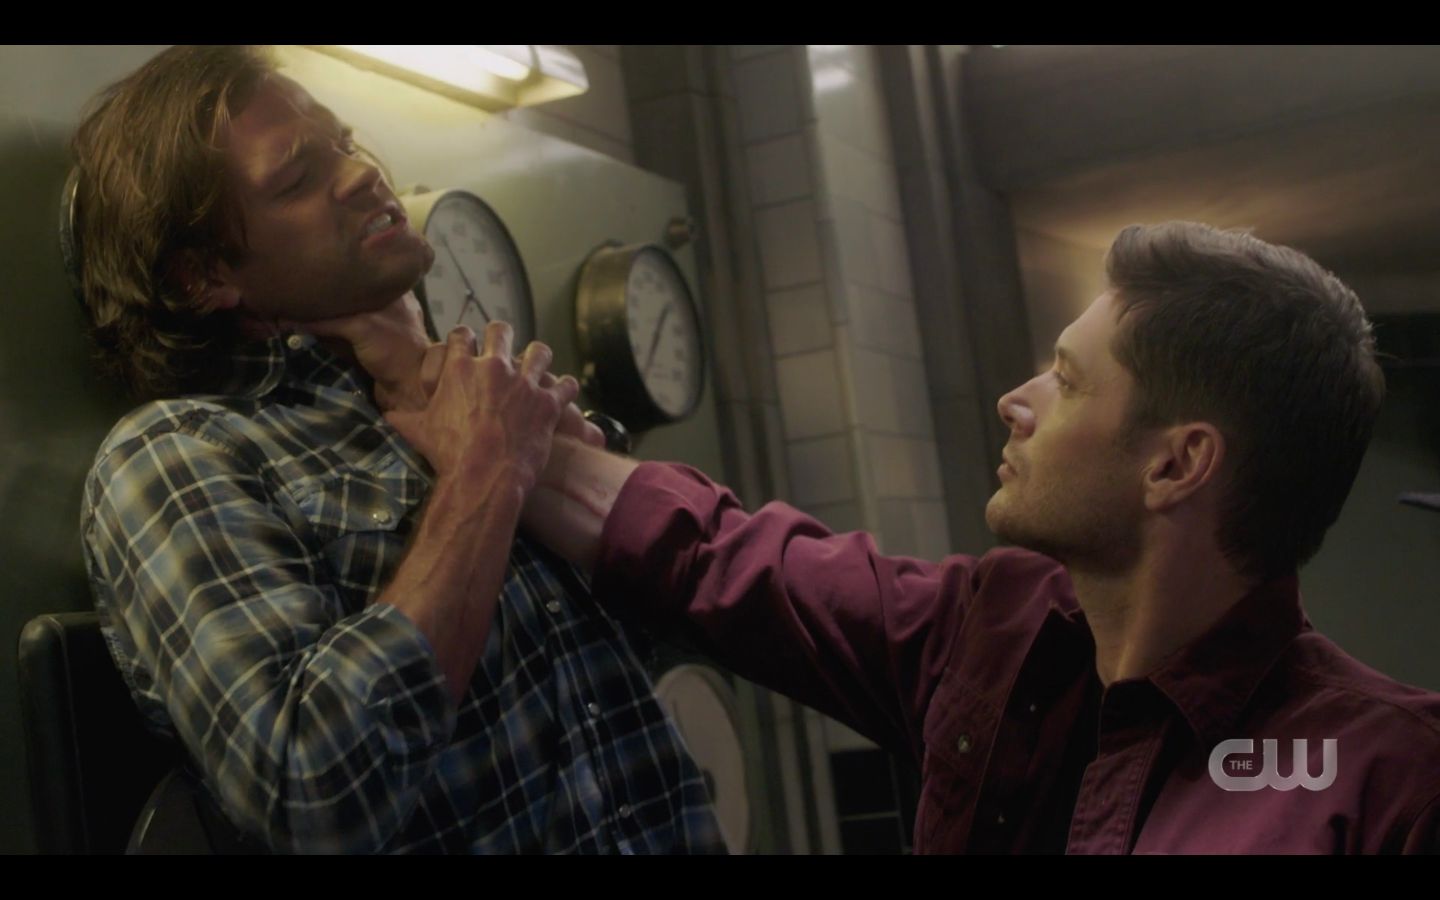 Dean pursues Sam and continues to throw him around, clearly way stronger th...